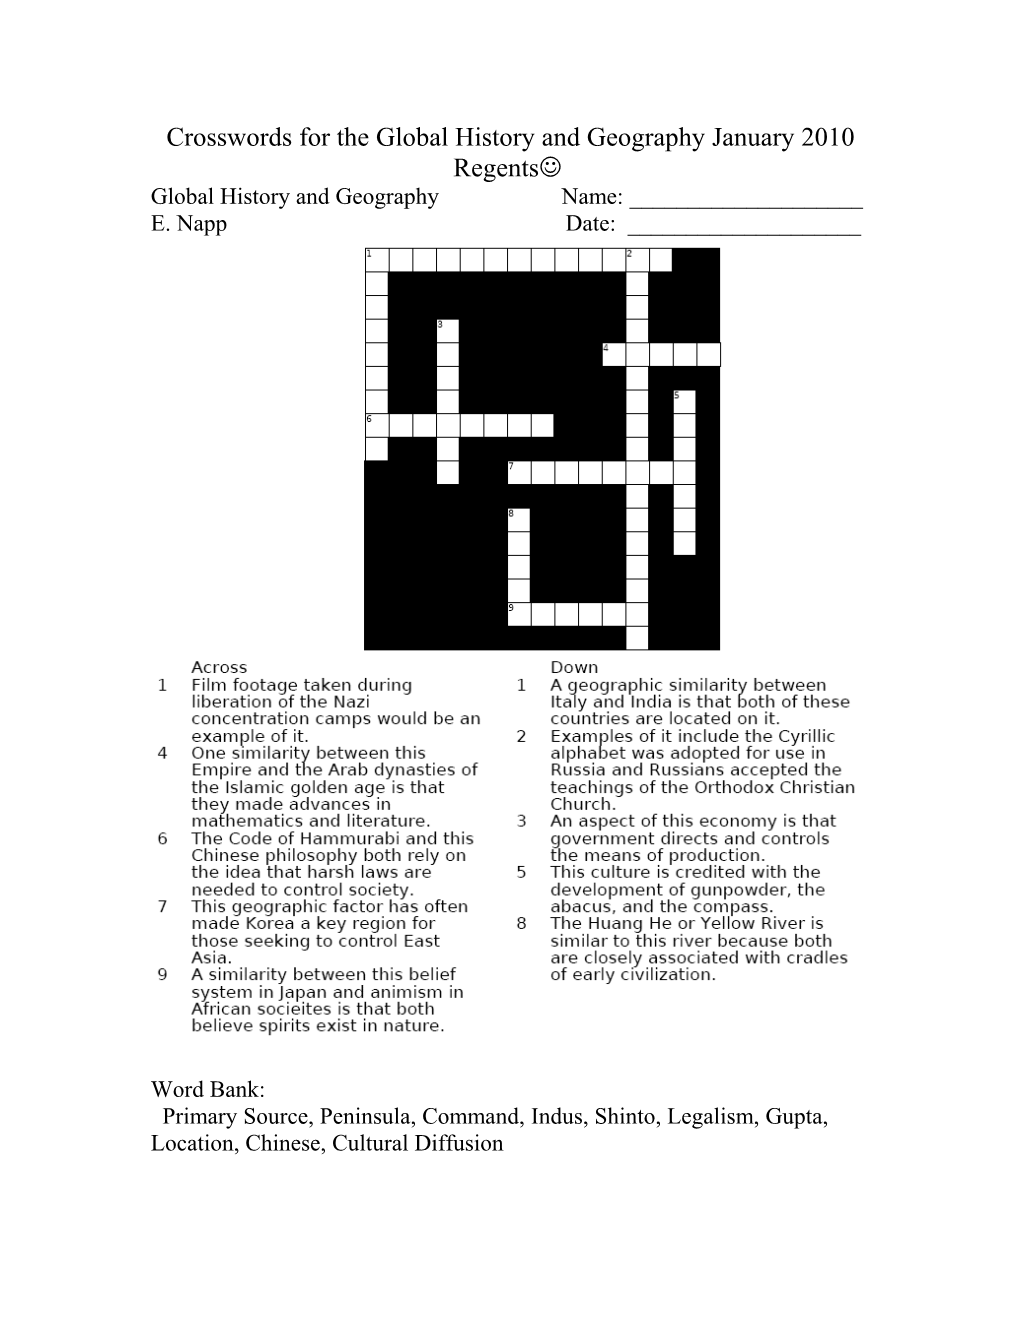 Crosswords for the Global History and Geography January 2008 Regents